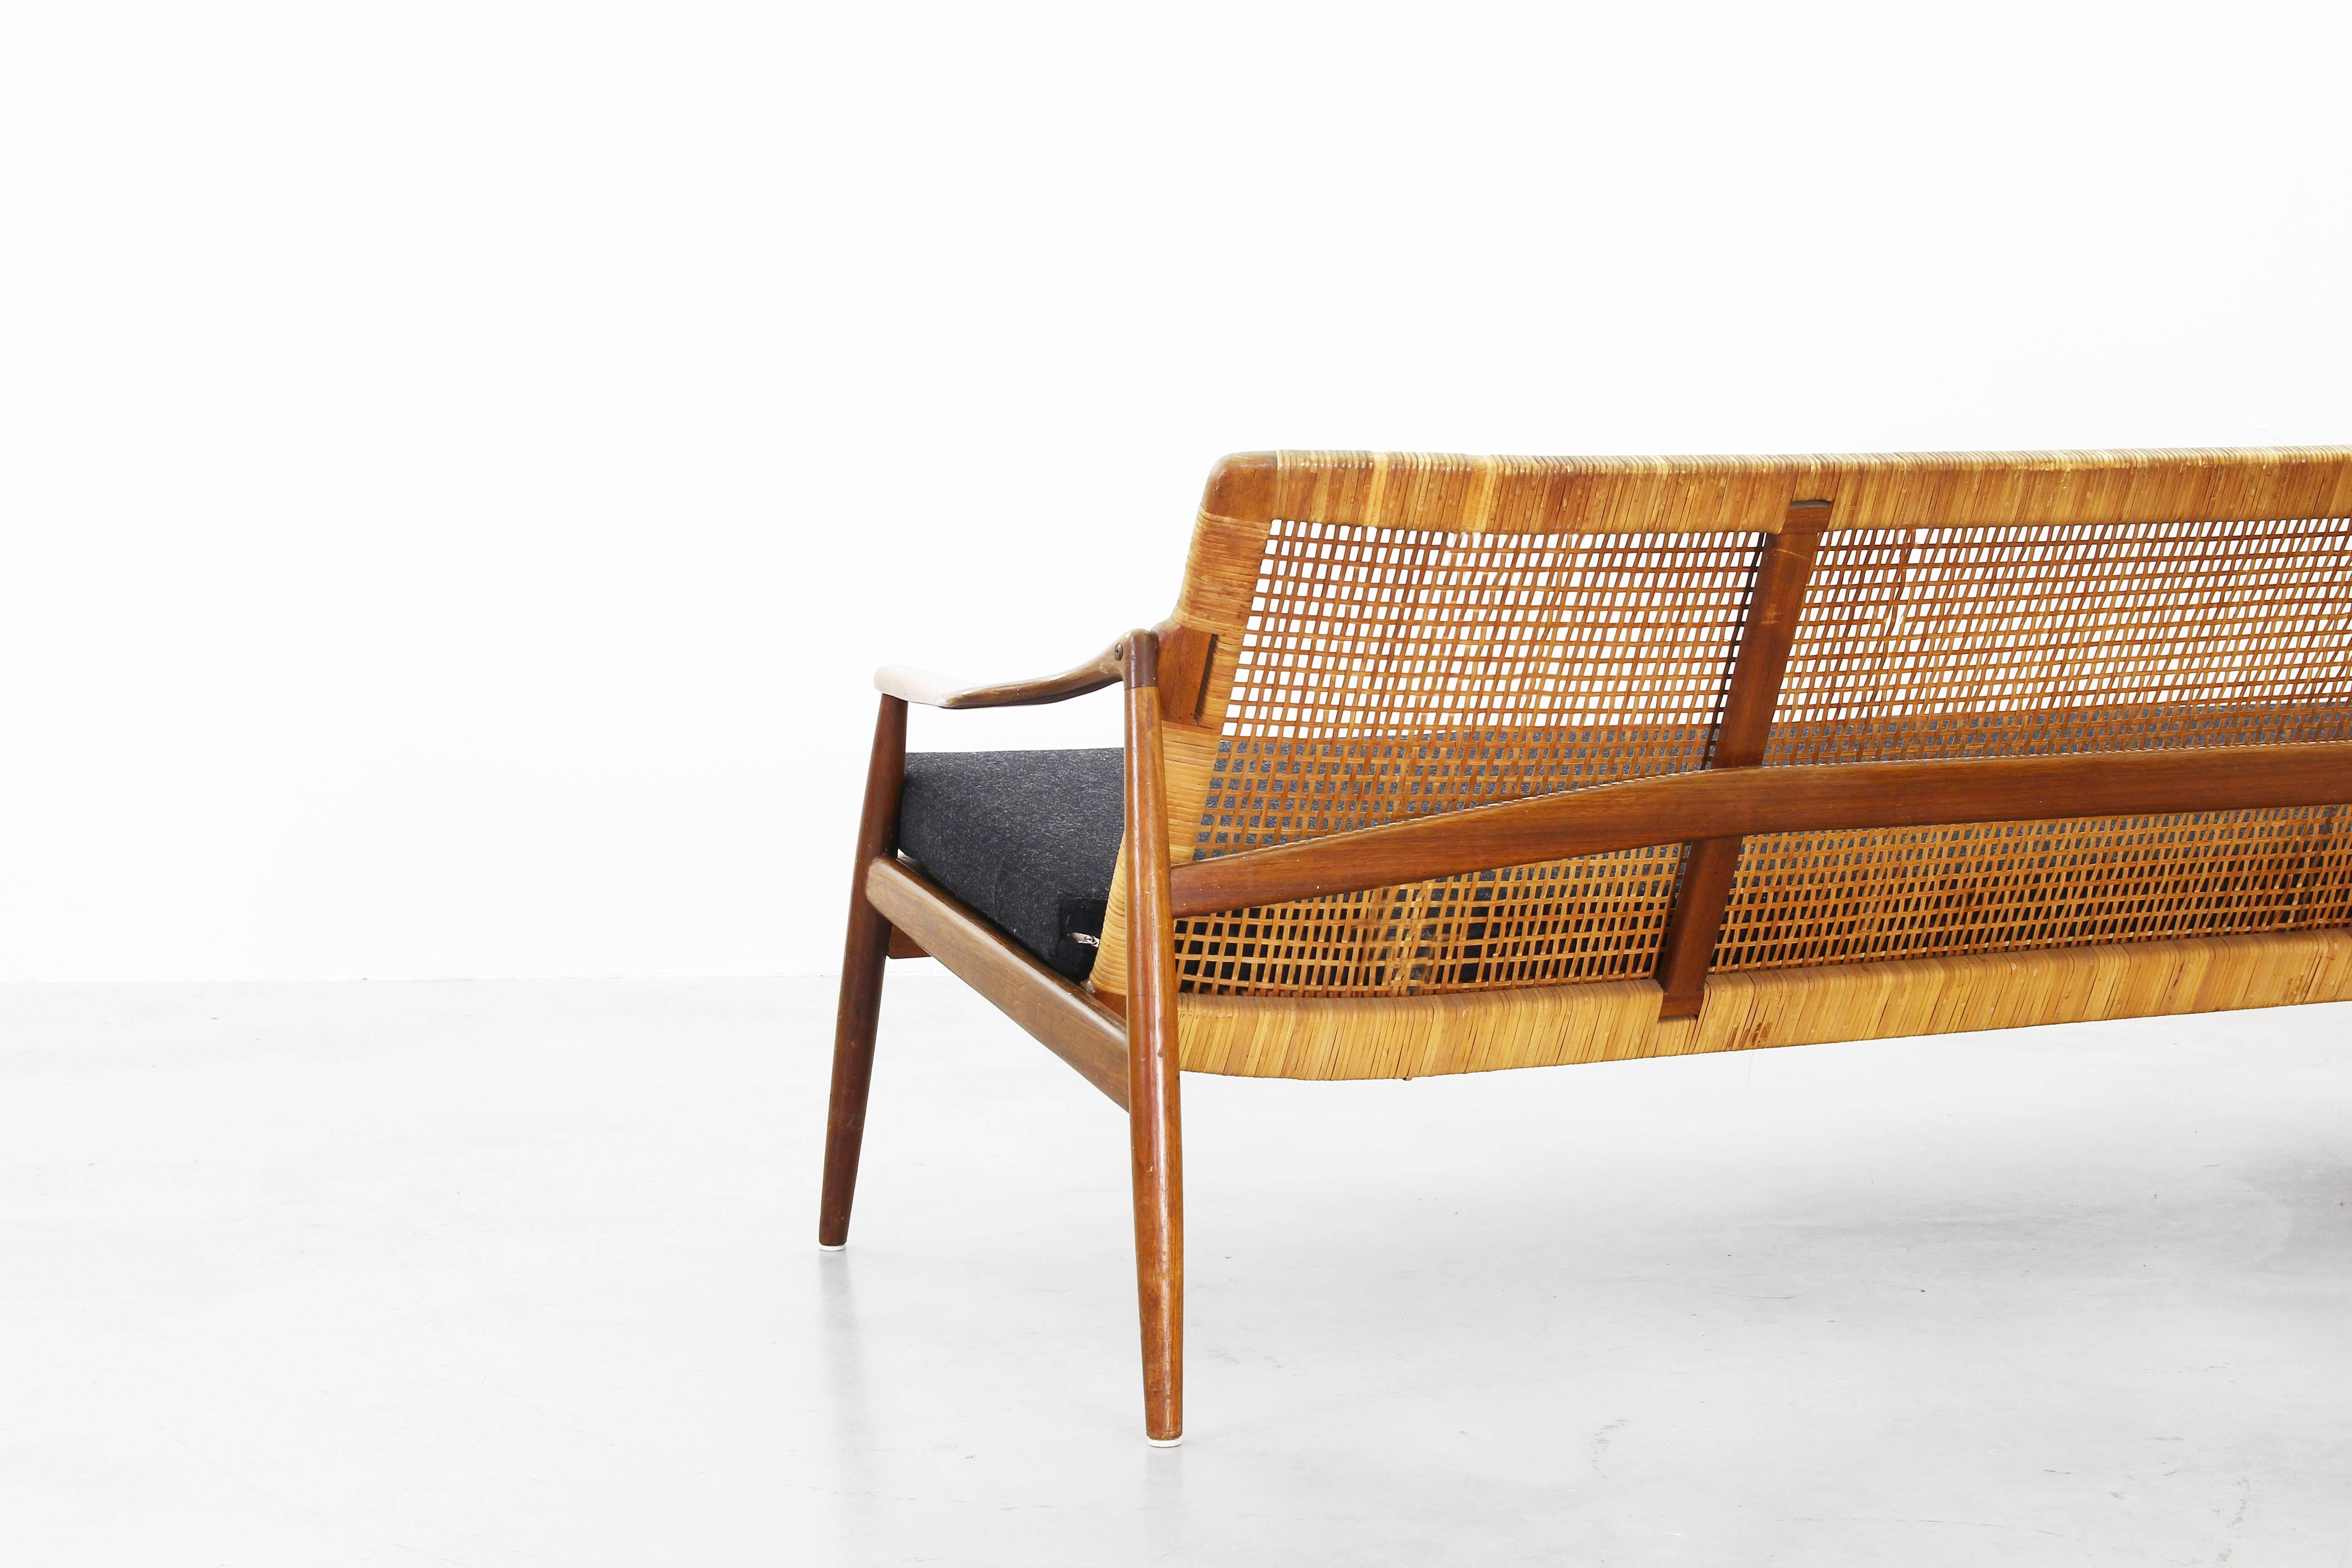 Cane Beautiful Sofa Made of Teak by Hartmut Lohmeyer for Wilkhahn, 1950s, Germany For Sale